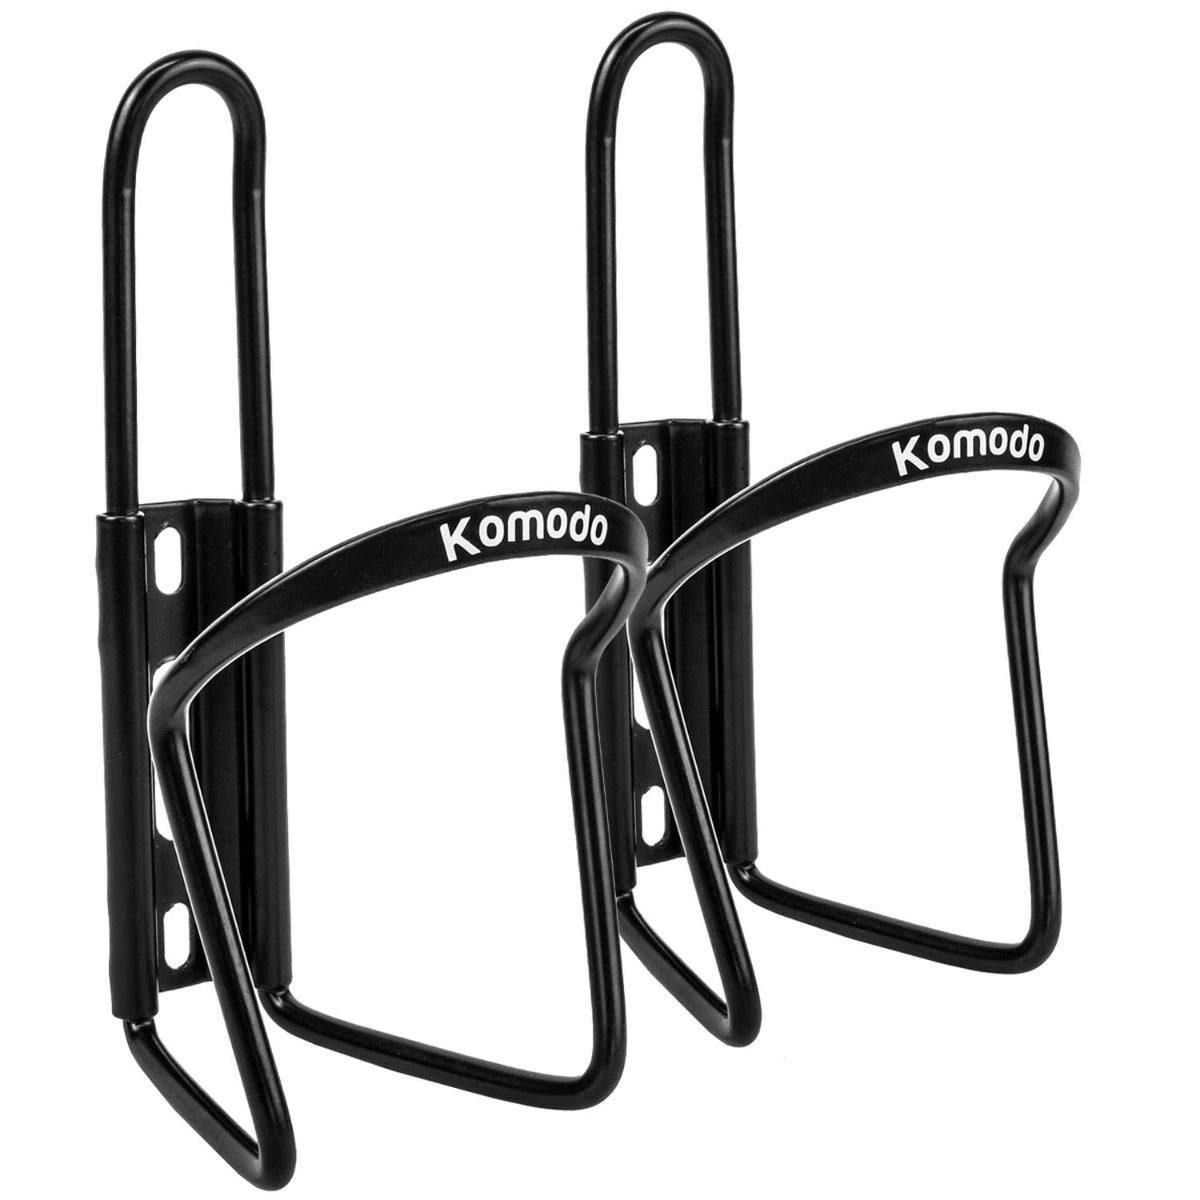 Set of 2 Bicycle Bottle Cages - Black